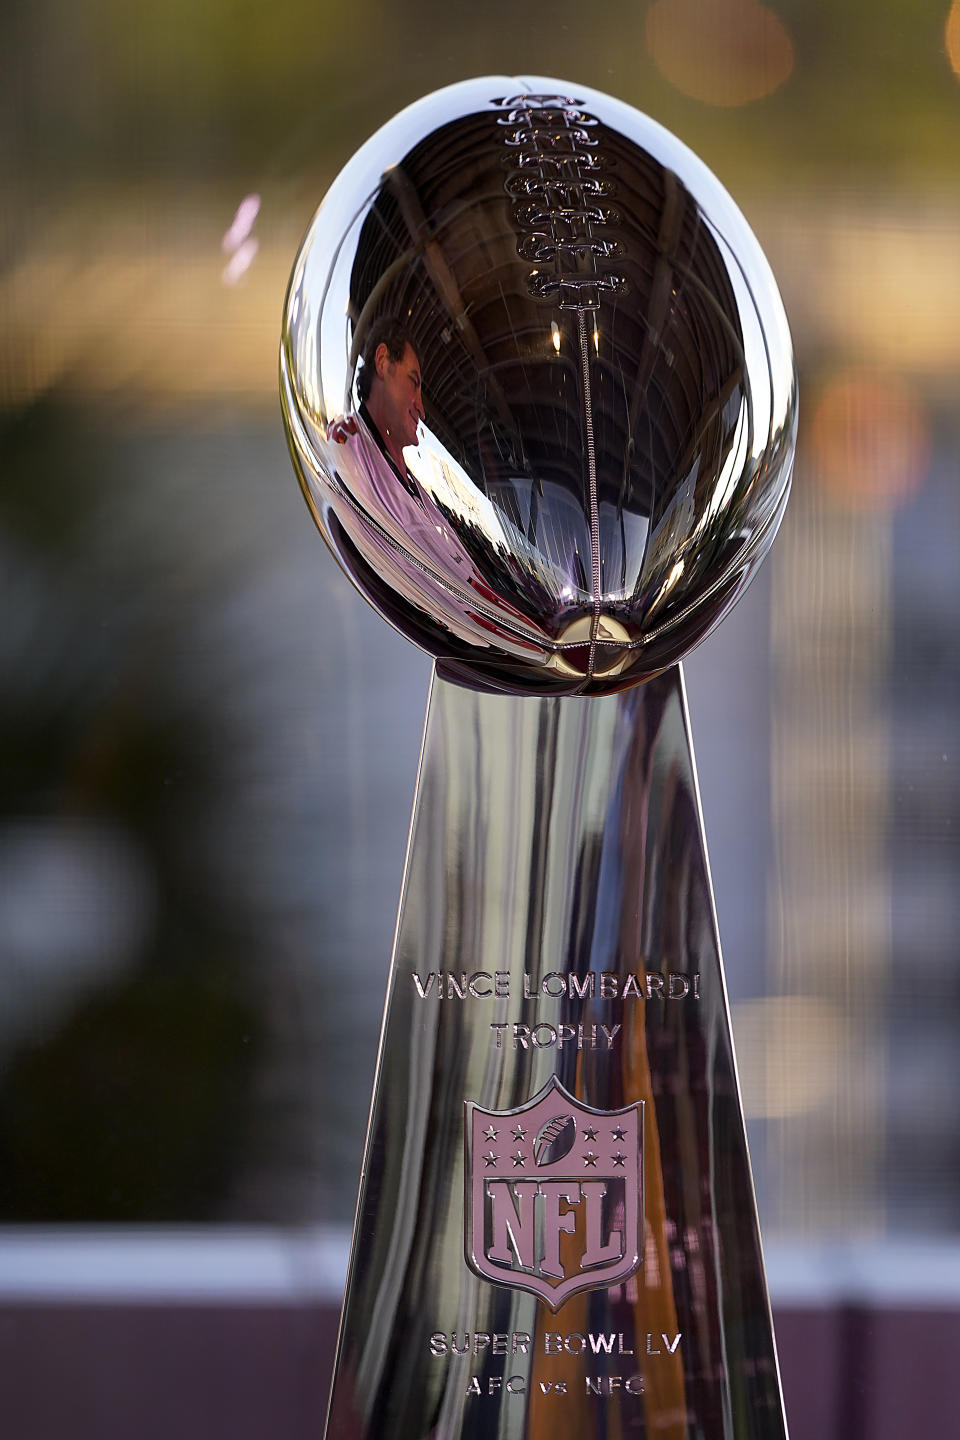 A man is reflected in the Lombardi Trophy at the NFL Experience Thursday, Feb. 4, 2021, in Tampa, Fla. The city is hosting Sunday's Super Bowl football game between the Tampa Bay Buccaneers and the Kansas City Chiefs. (AP Photo/Charlie Riedel)